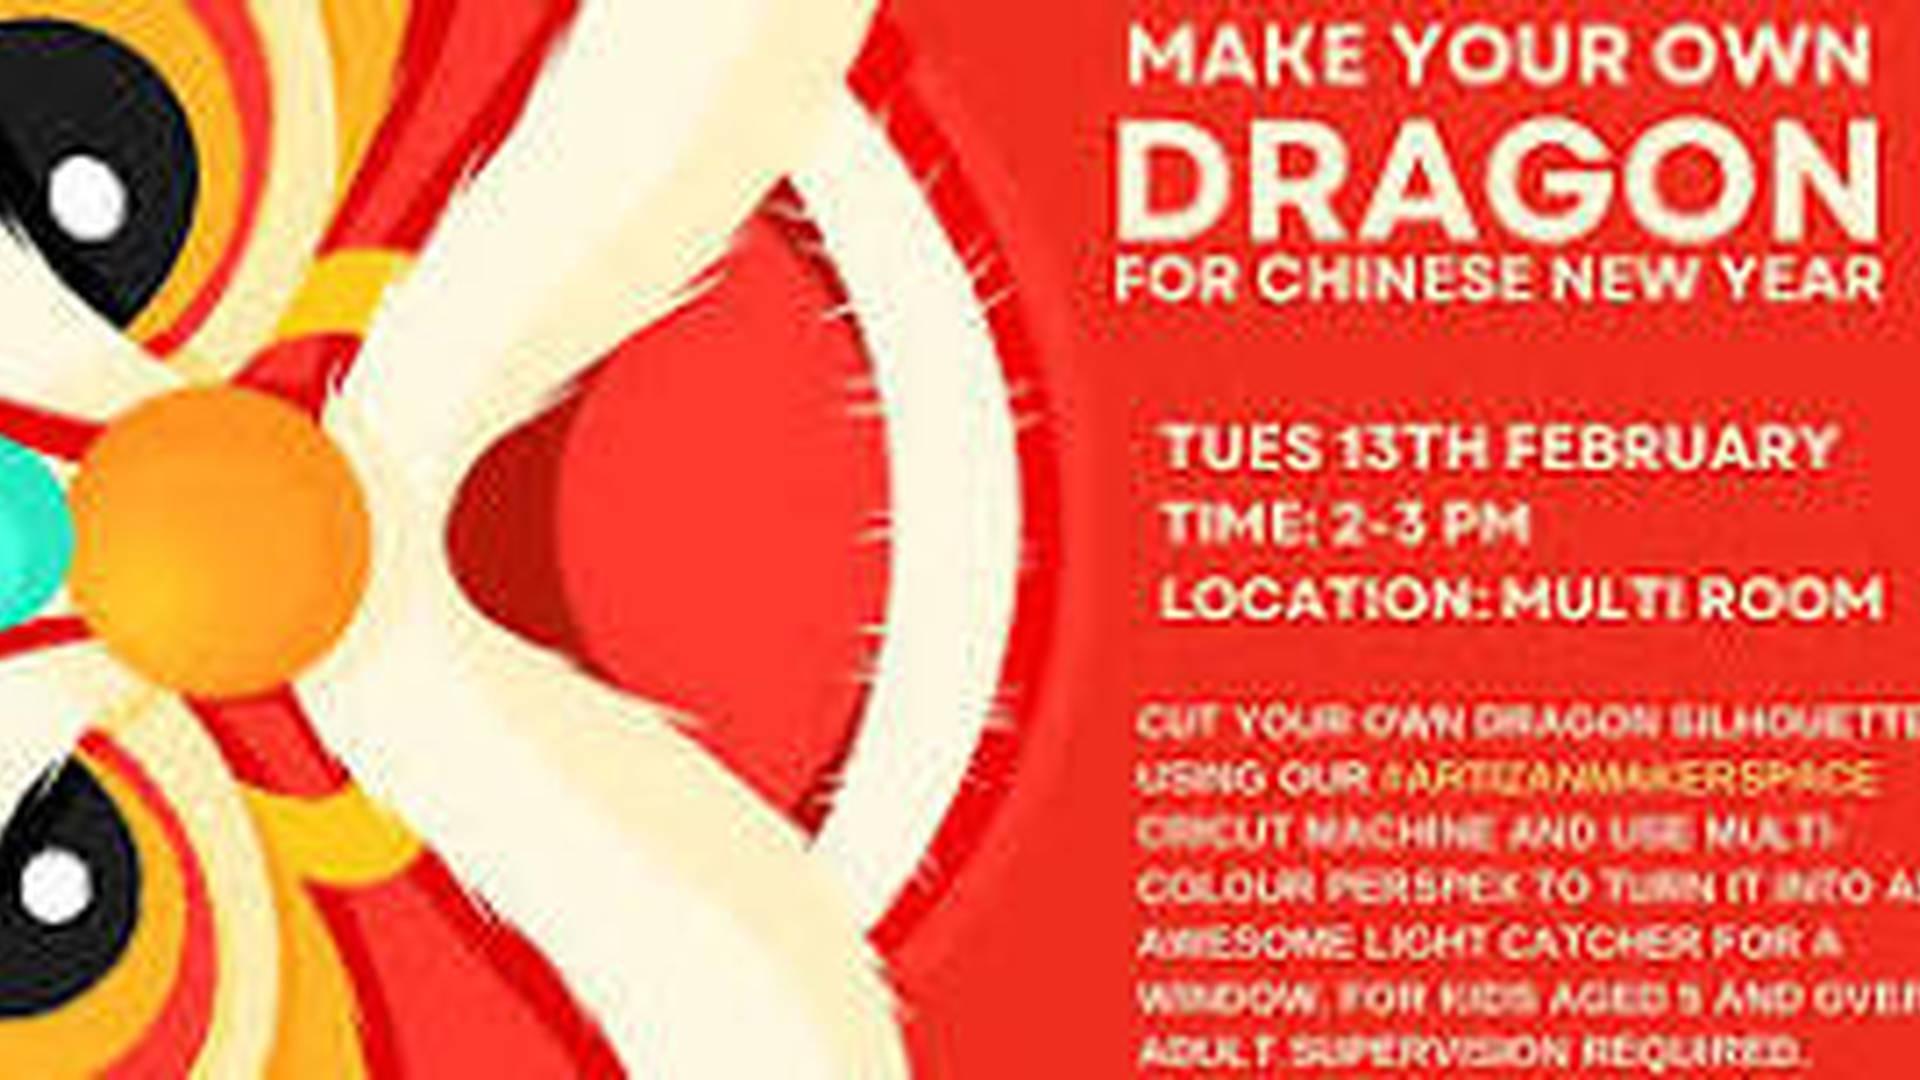 Half Term Children's Event - Make Your Own Dragon For Chinese New Year! photo